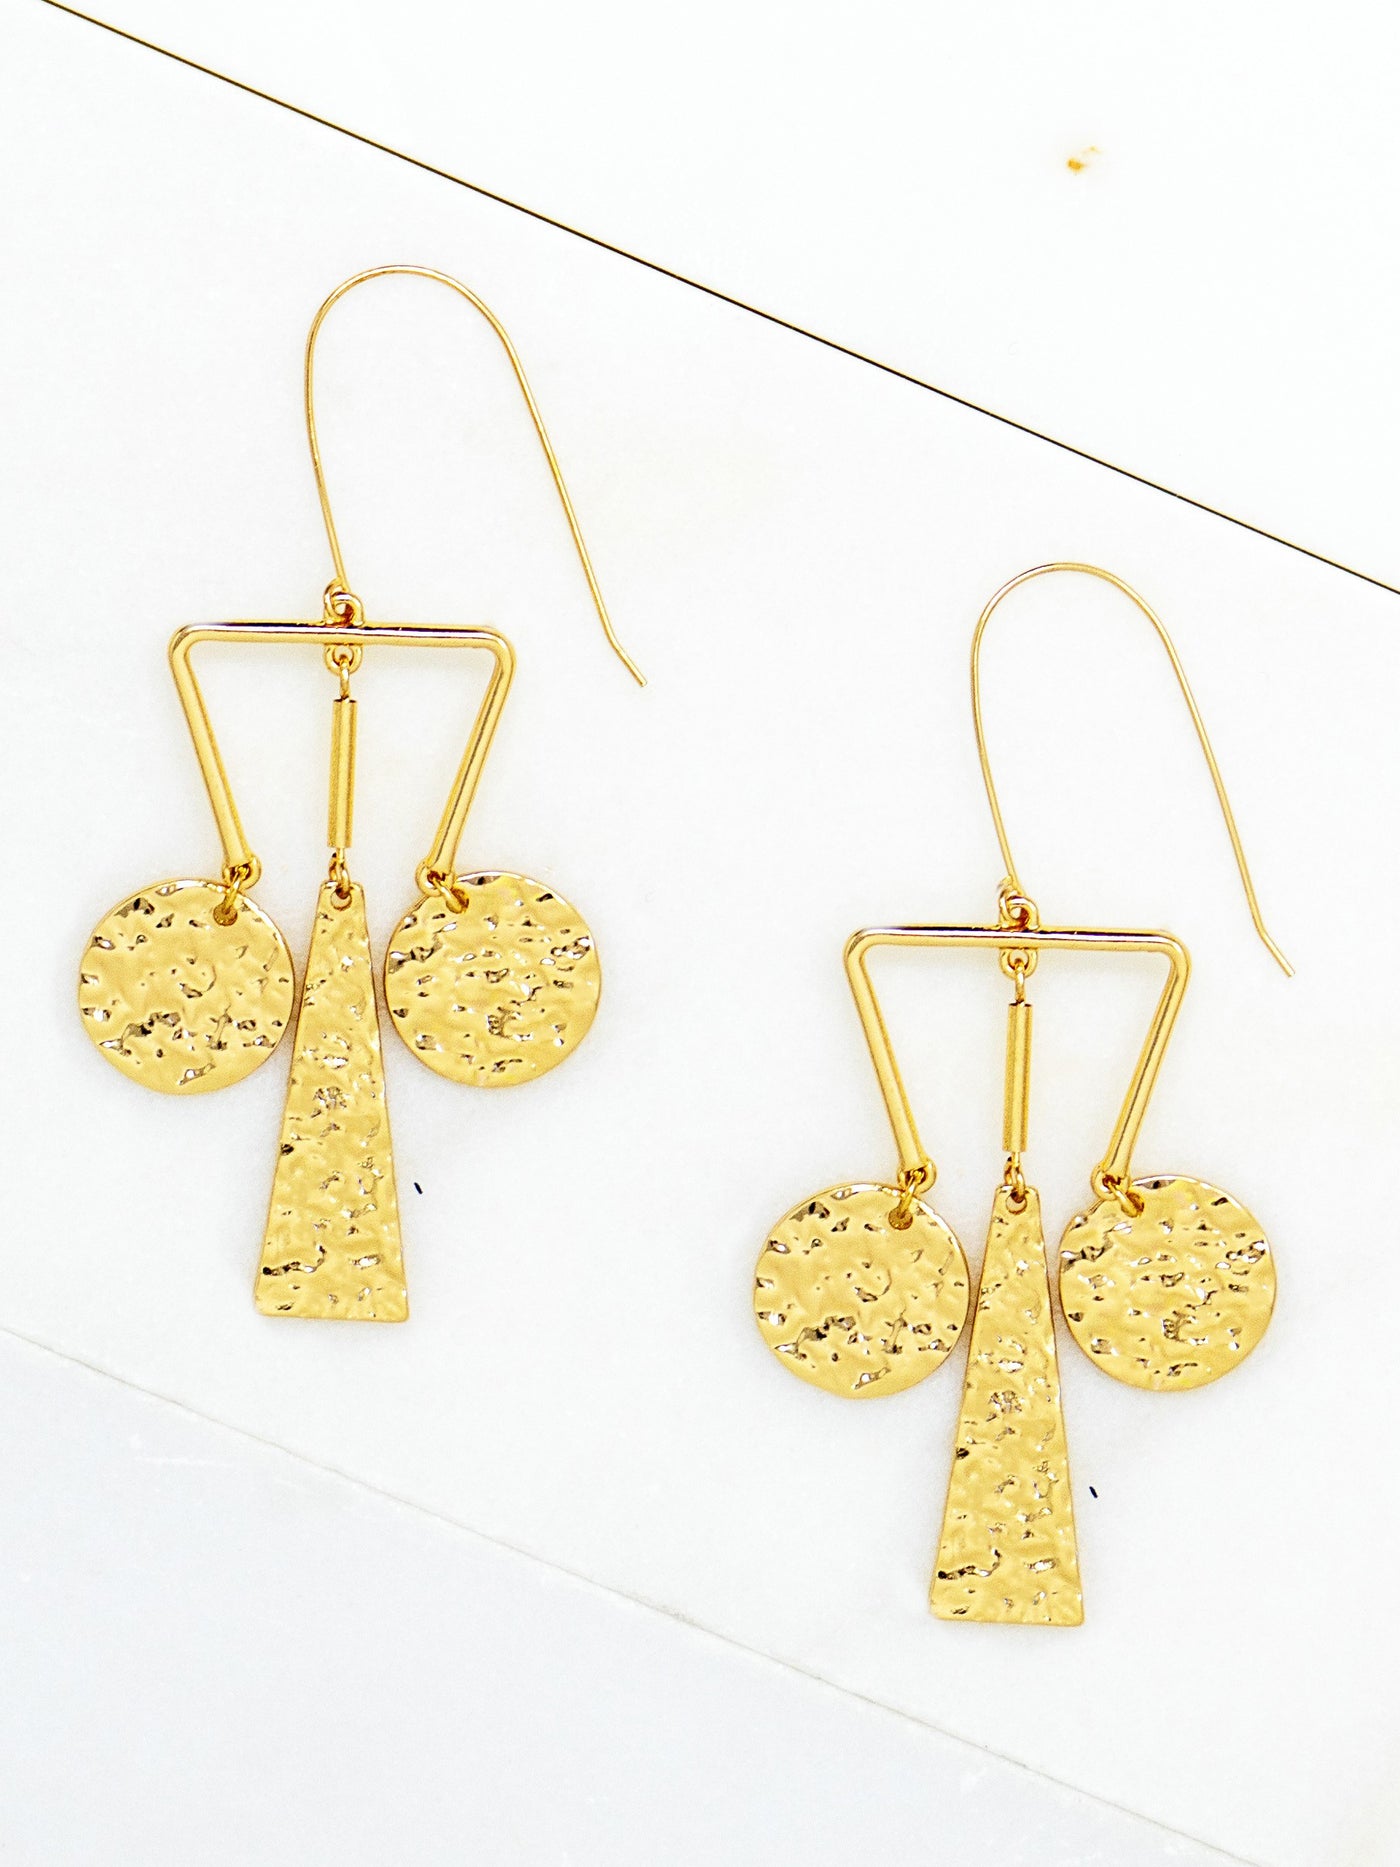 Hammered Statement Earrings